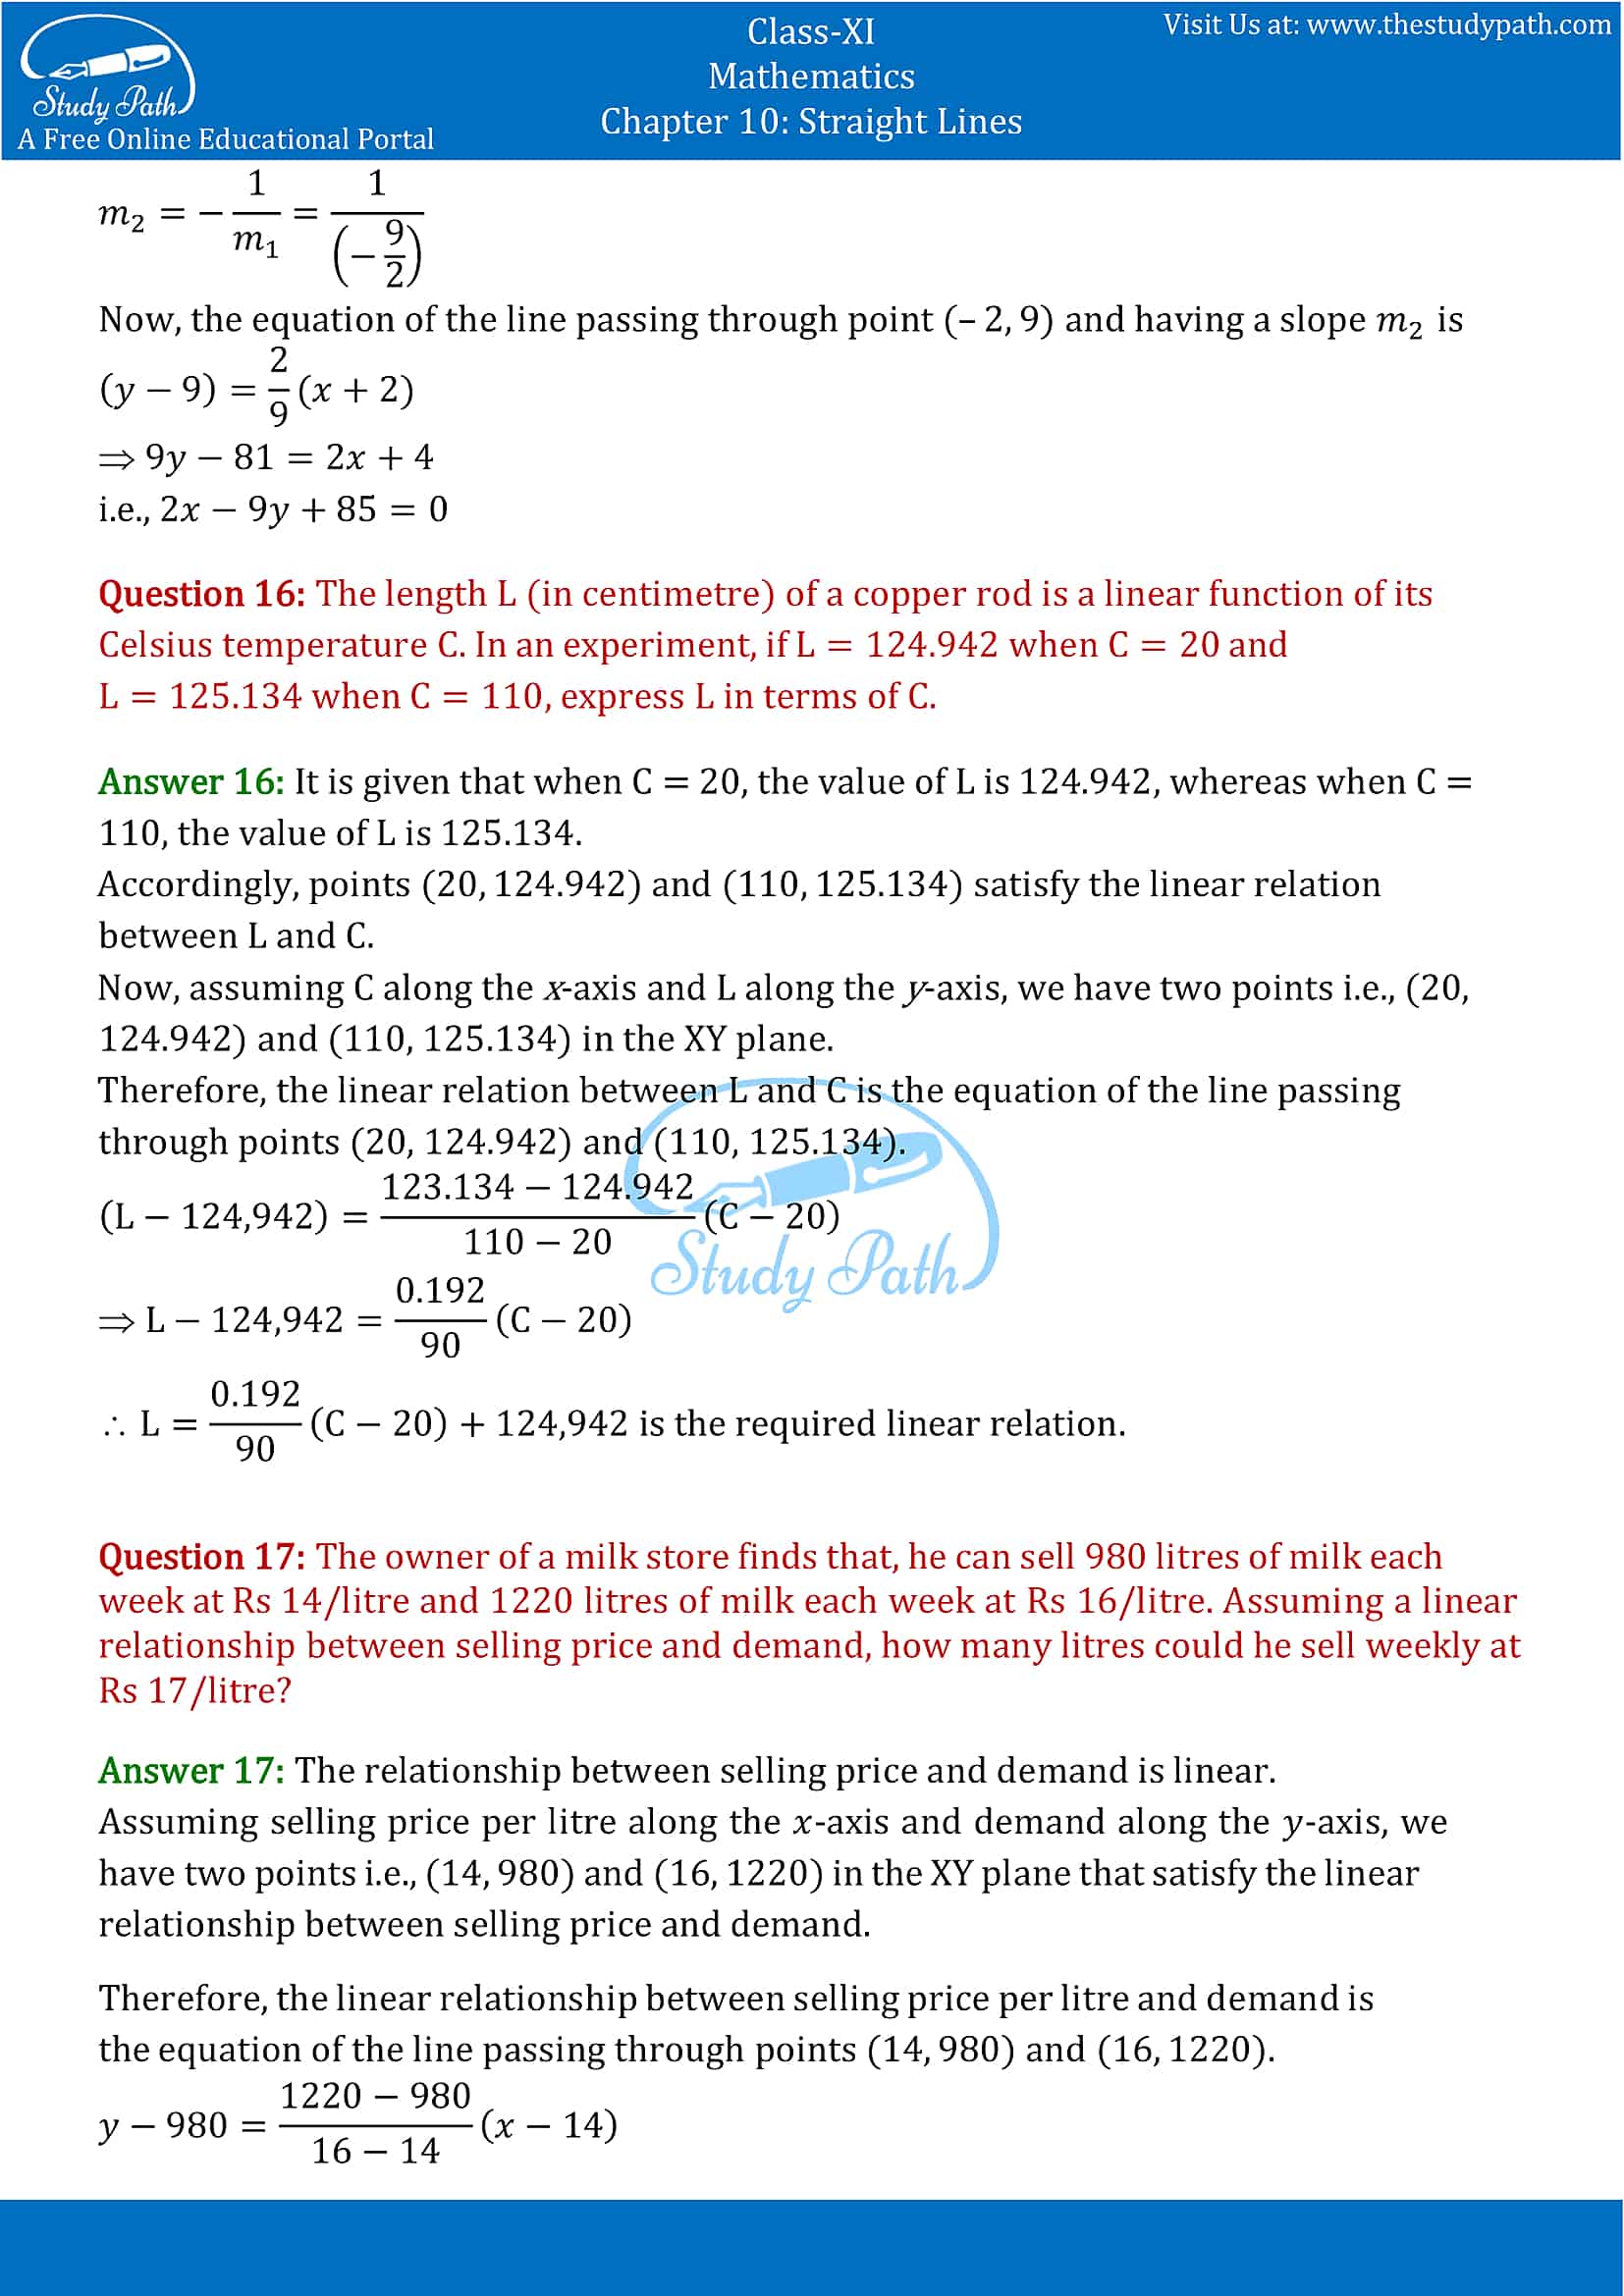 NCERT Solutions for Class 11 Maths chapter 10 Straight Lines Exercise 10.2 Part-8